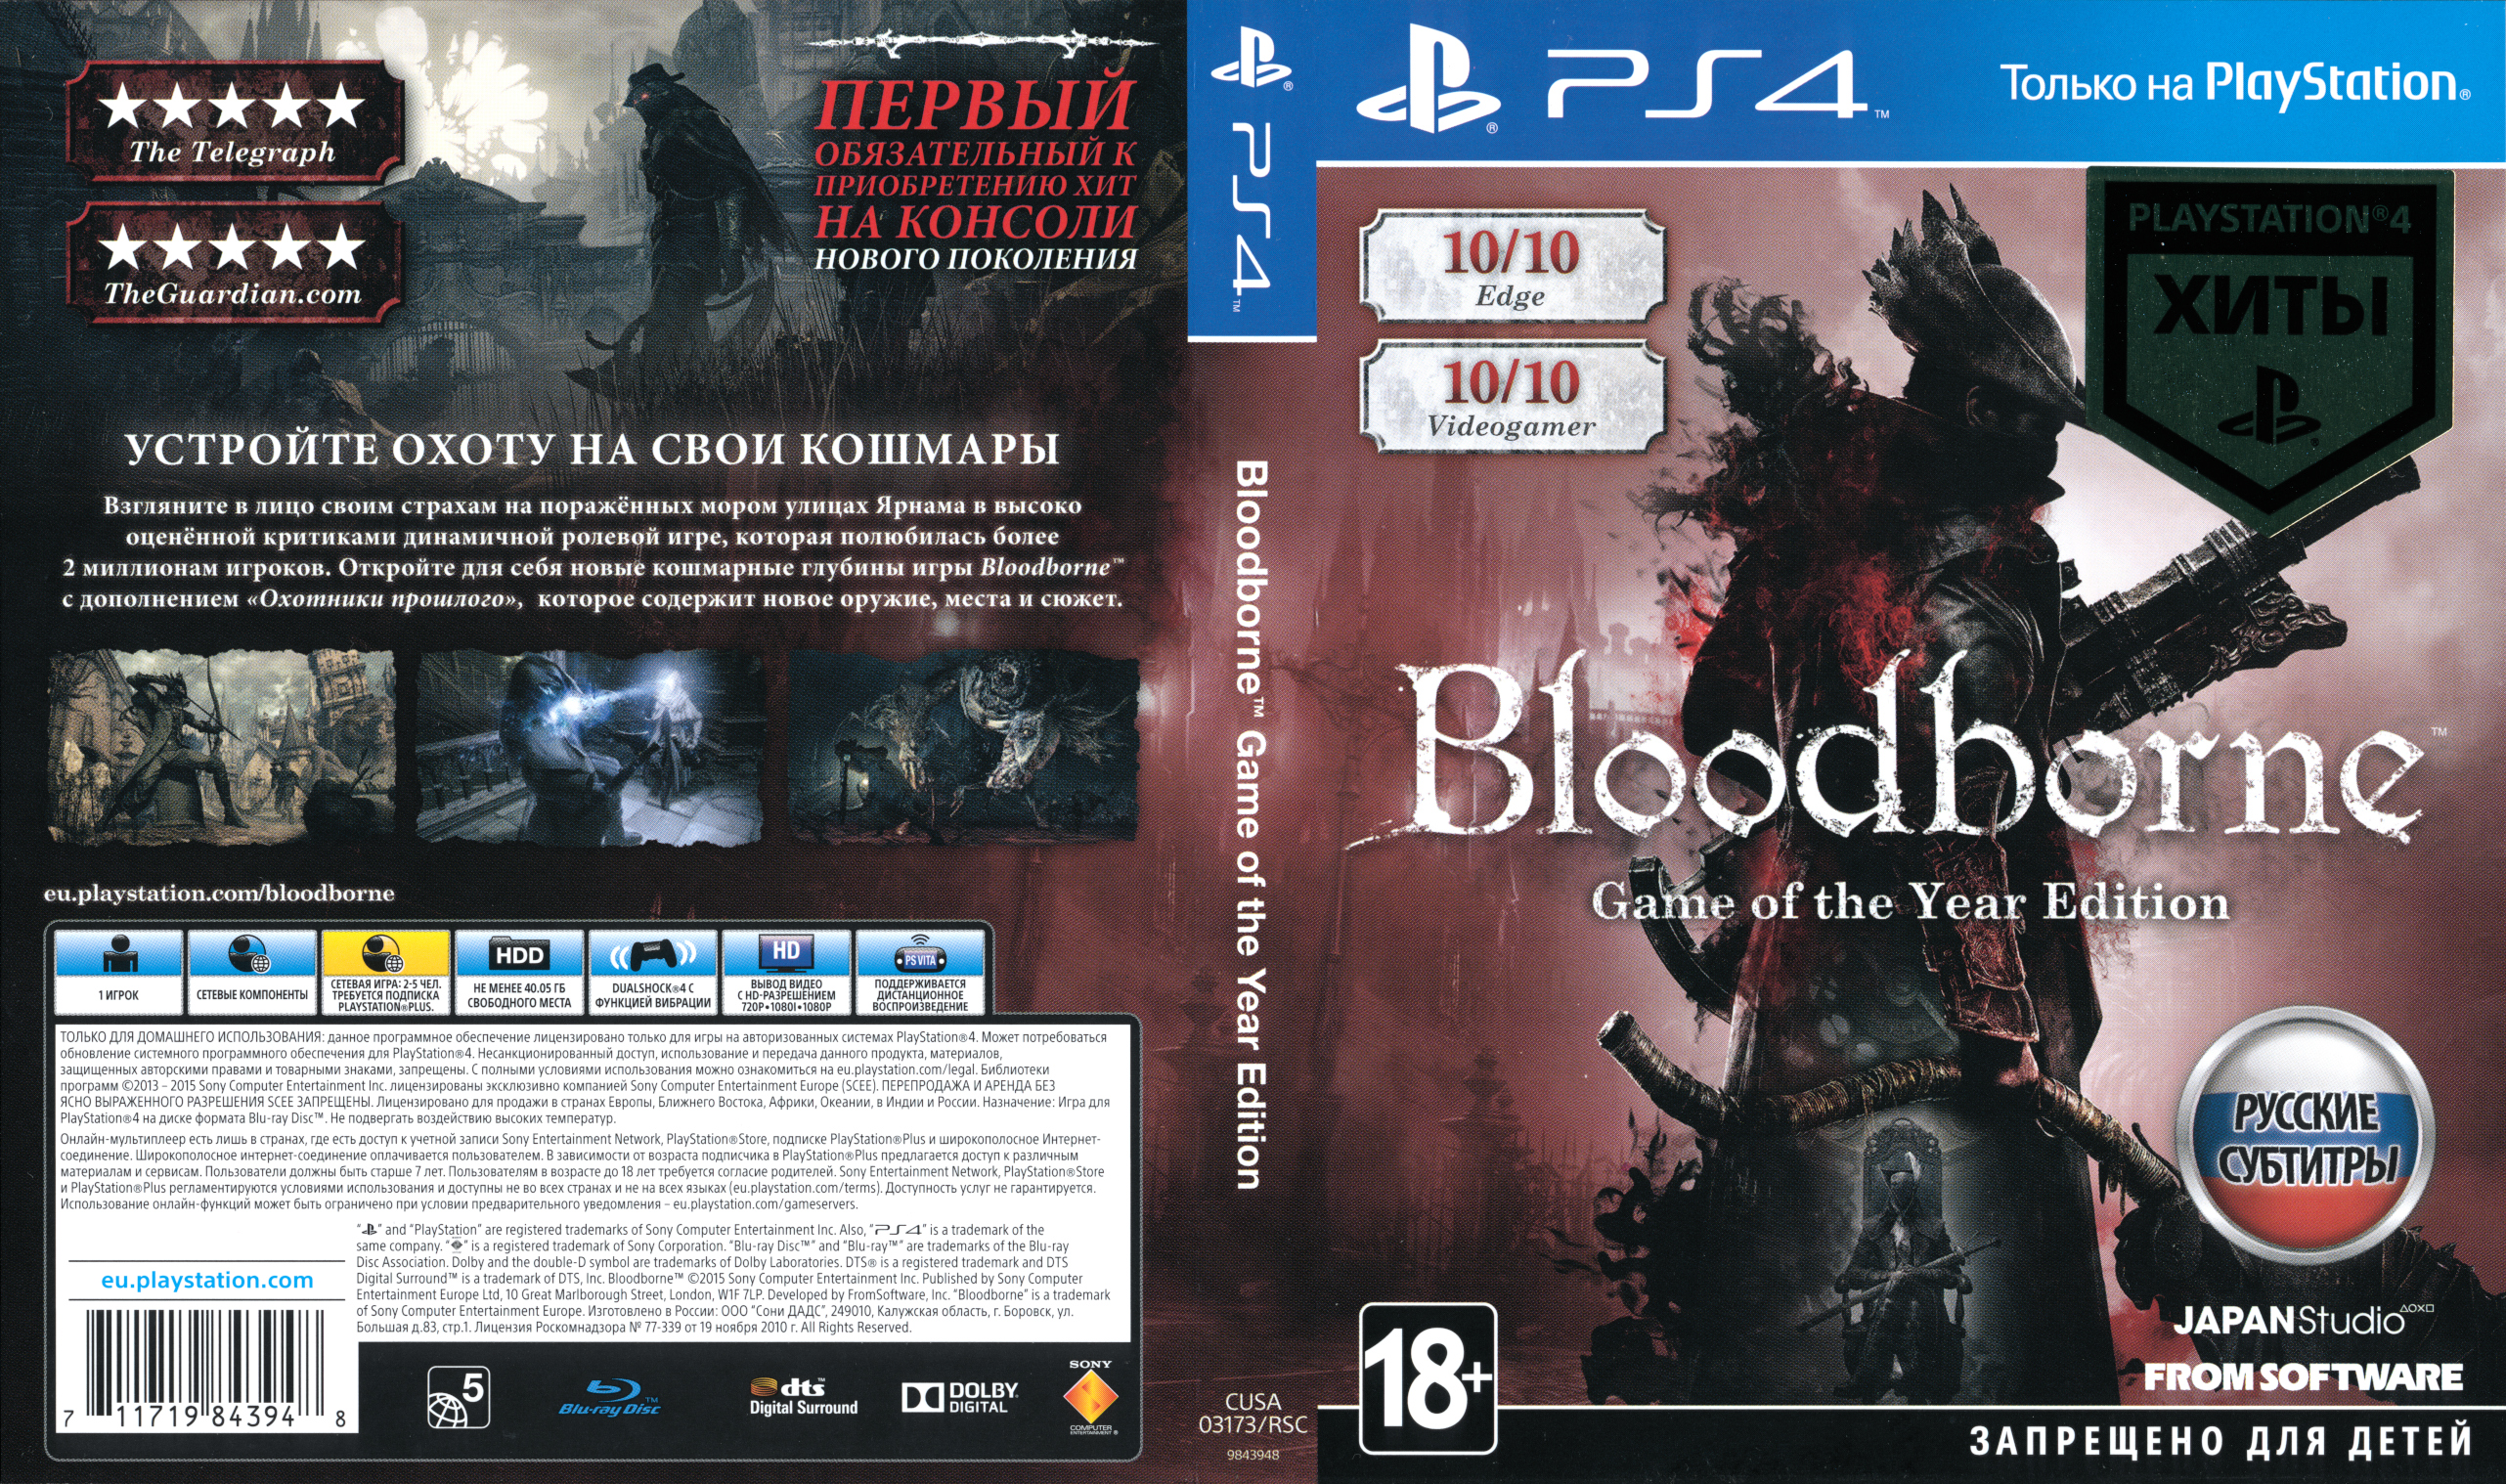 BLOODBORNE GAME OF THE YEAR EDITION PS4 - MyGames Now